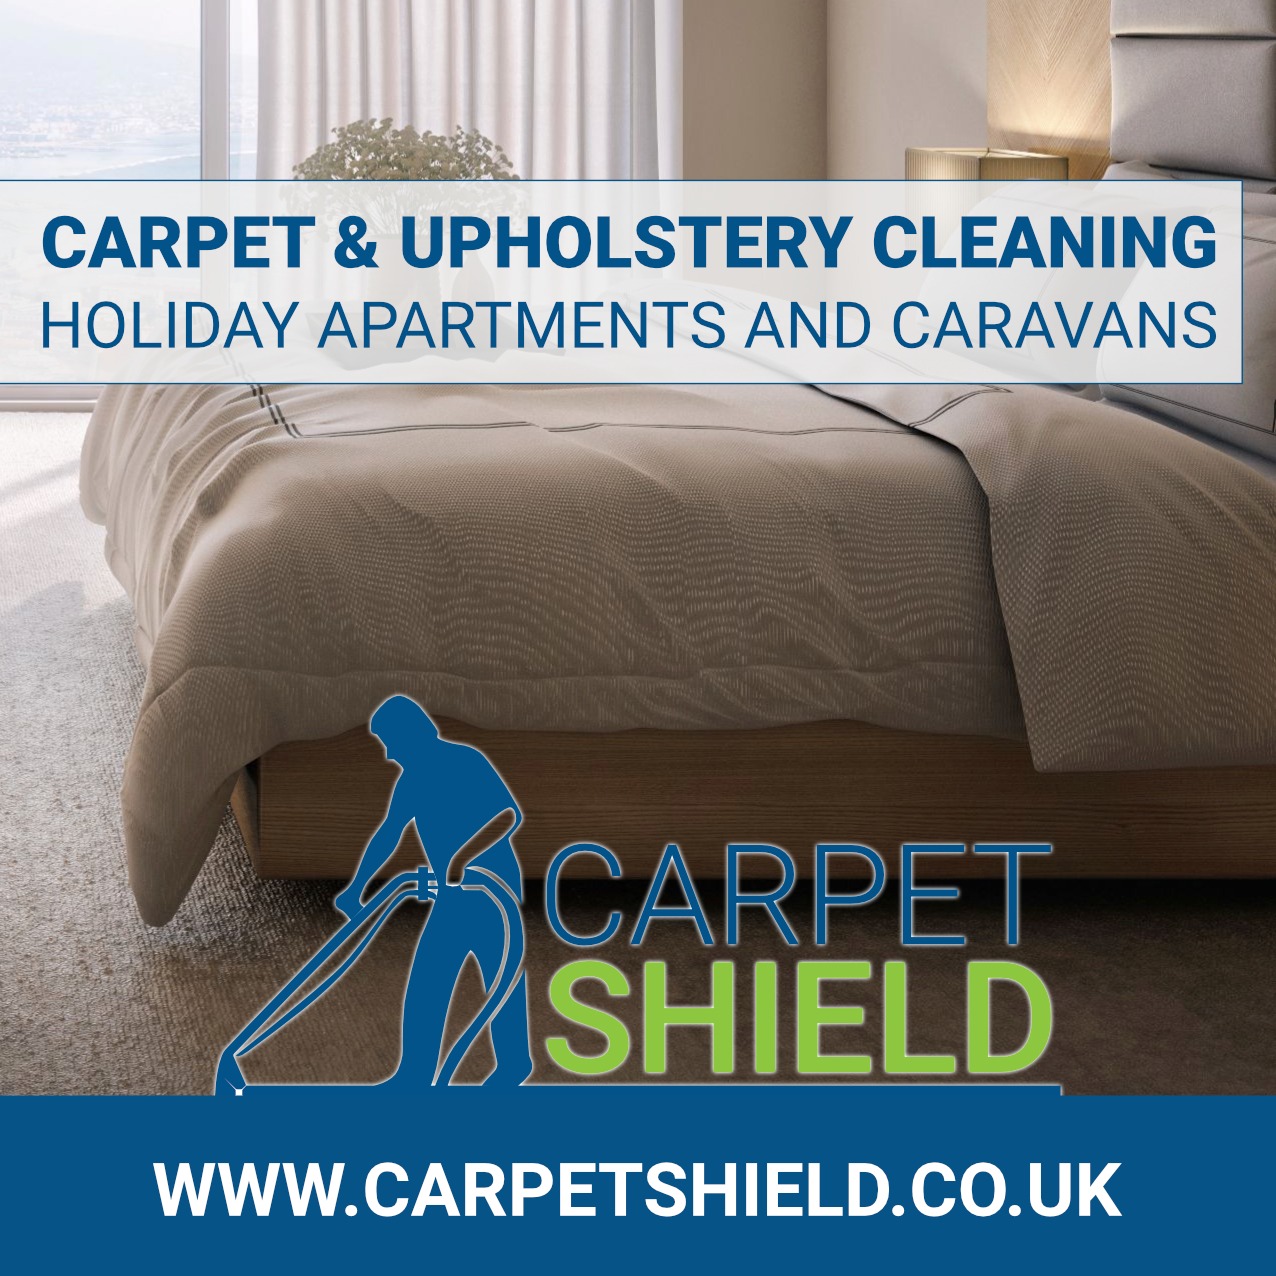 Carpet & Upholstery Cleaning in Cumbria . . .